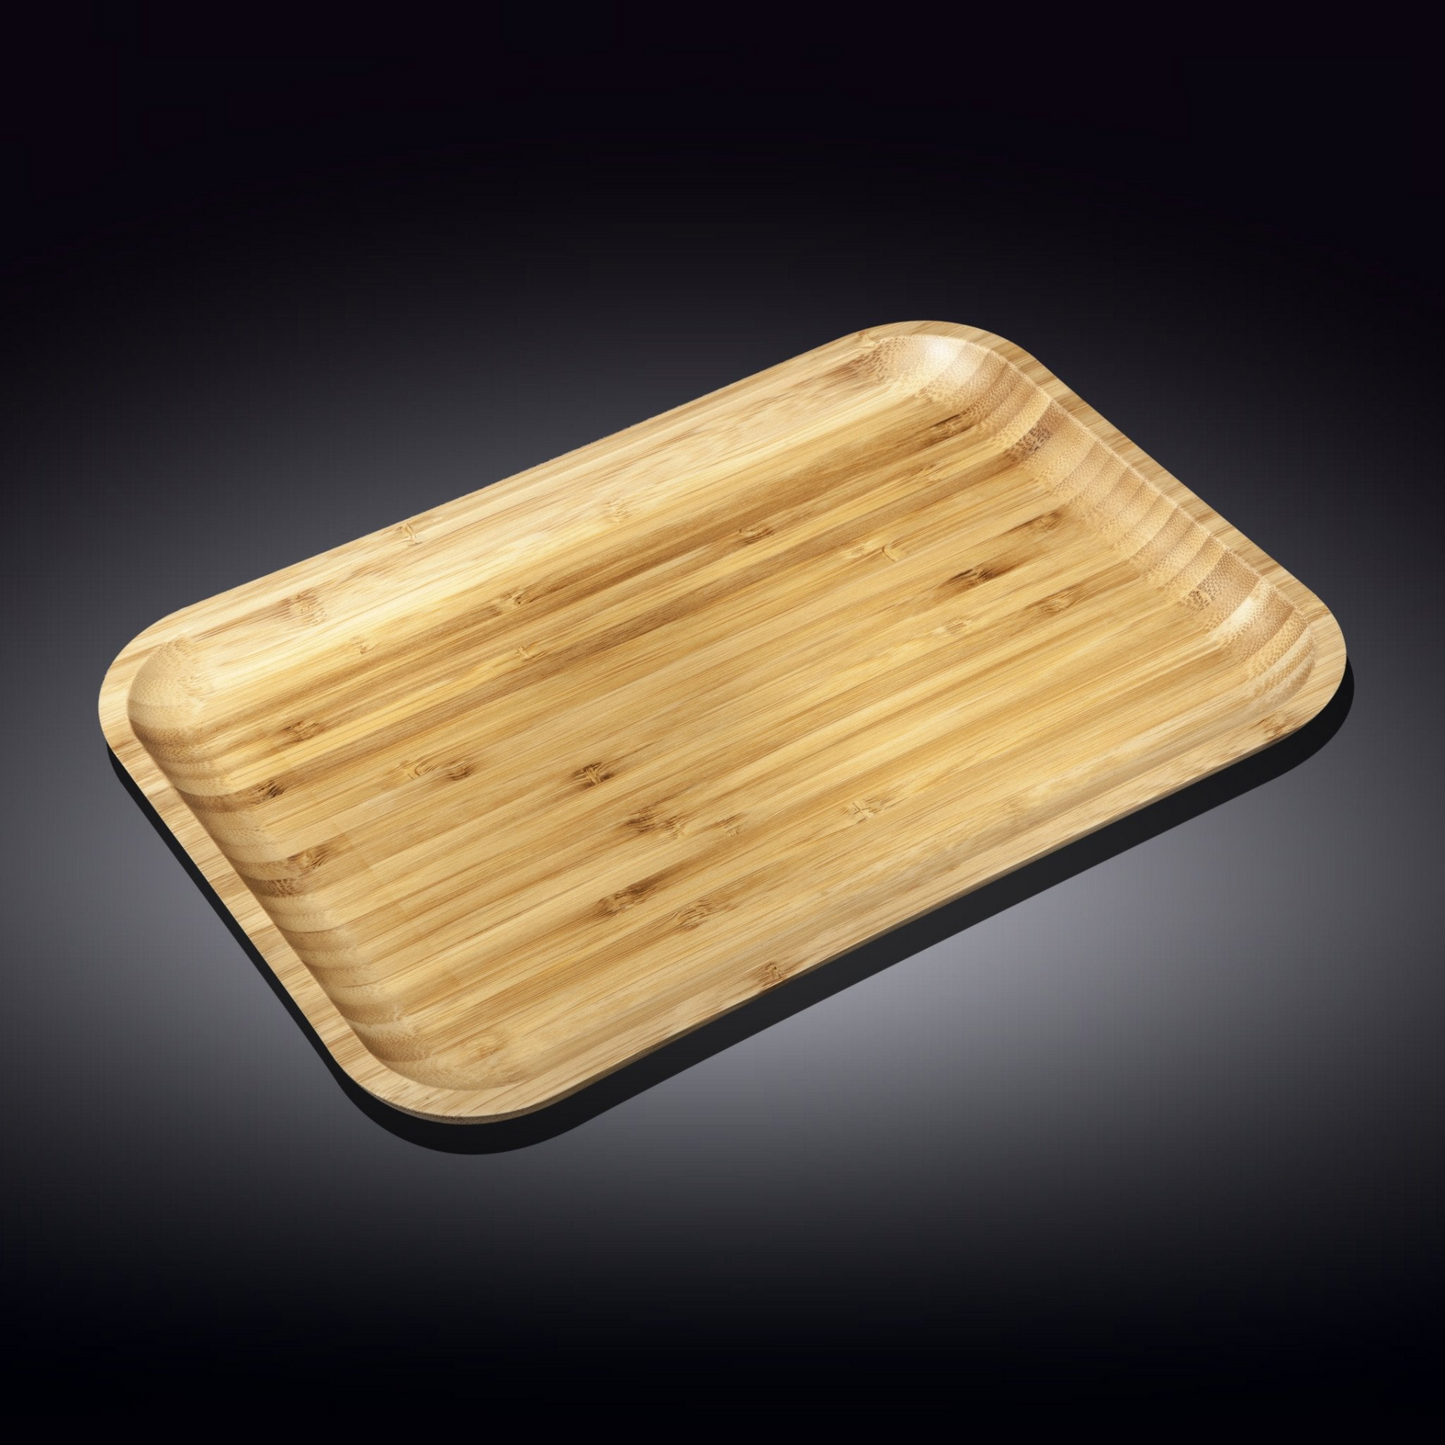 Wilmax Bamboo Wood Platter 13" X 9" | For Appetizers / Barbecue / Burger Sliders   WL-771055/A